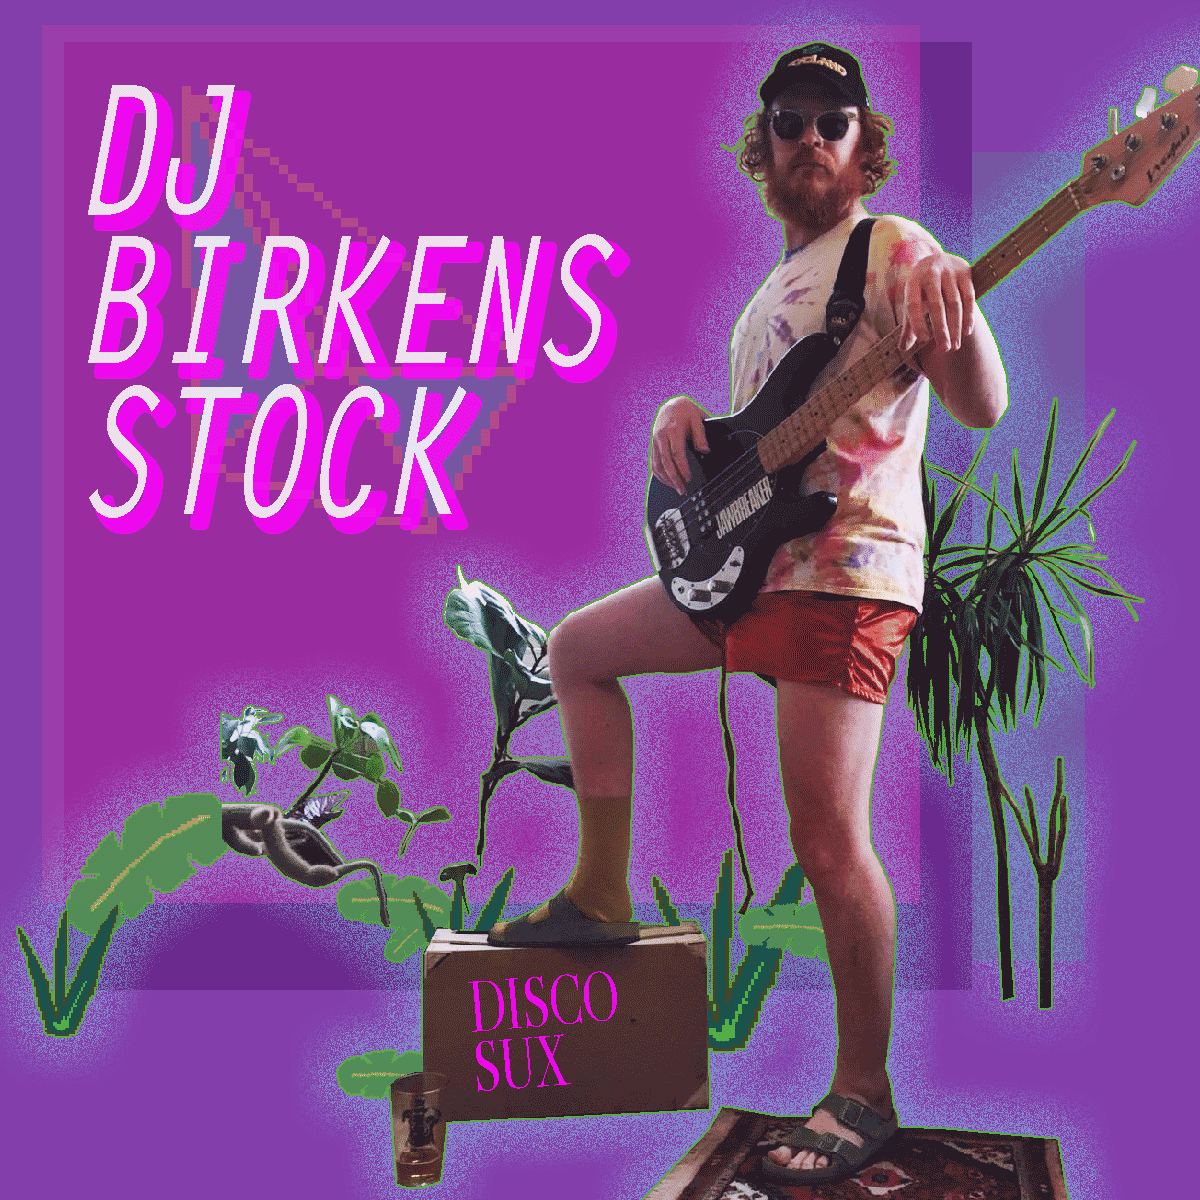 Cover for the Midnight Mischief mix shows DJ Birkens Tock playing bass guitar in a pink neon jungle